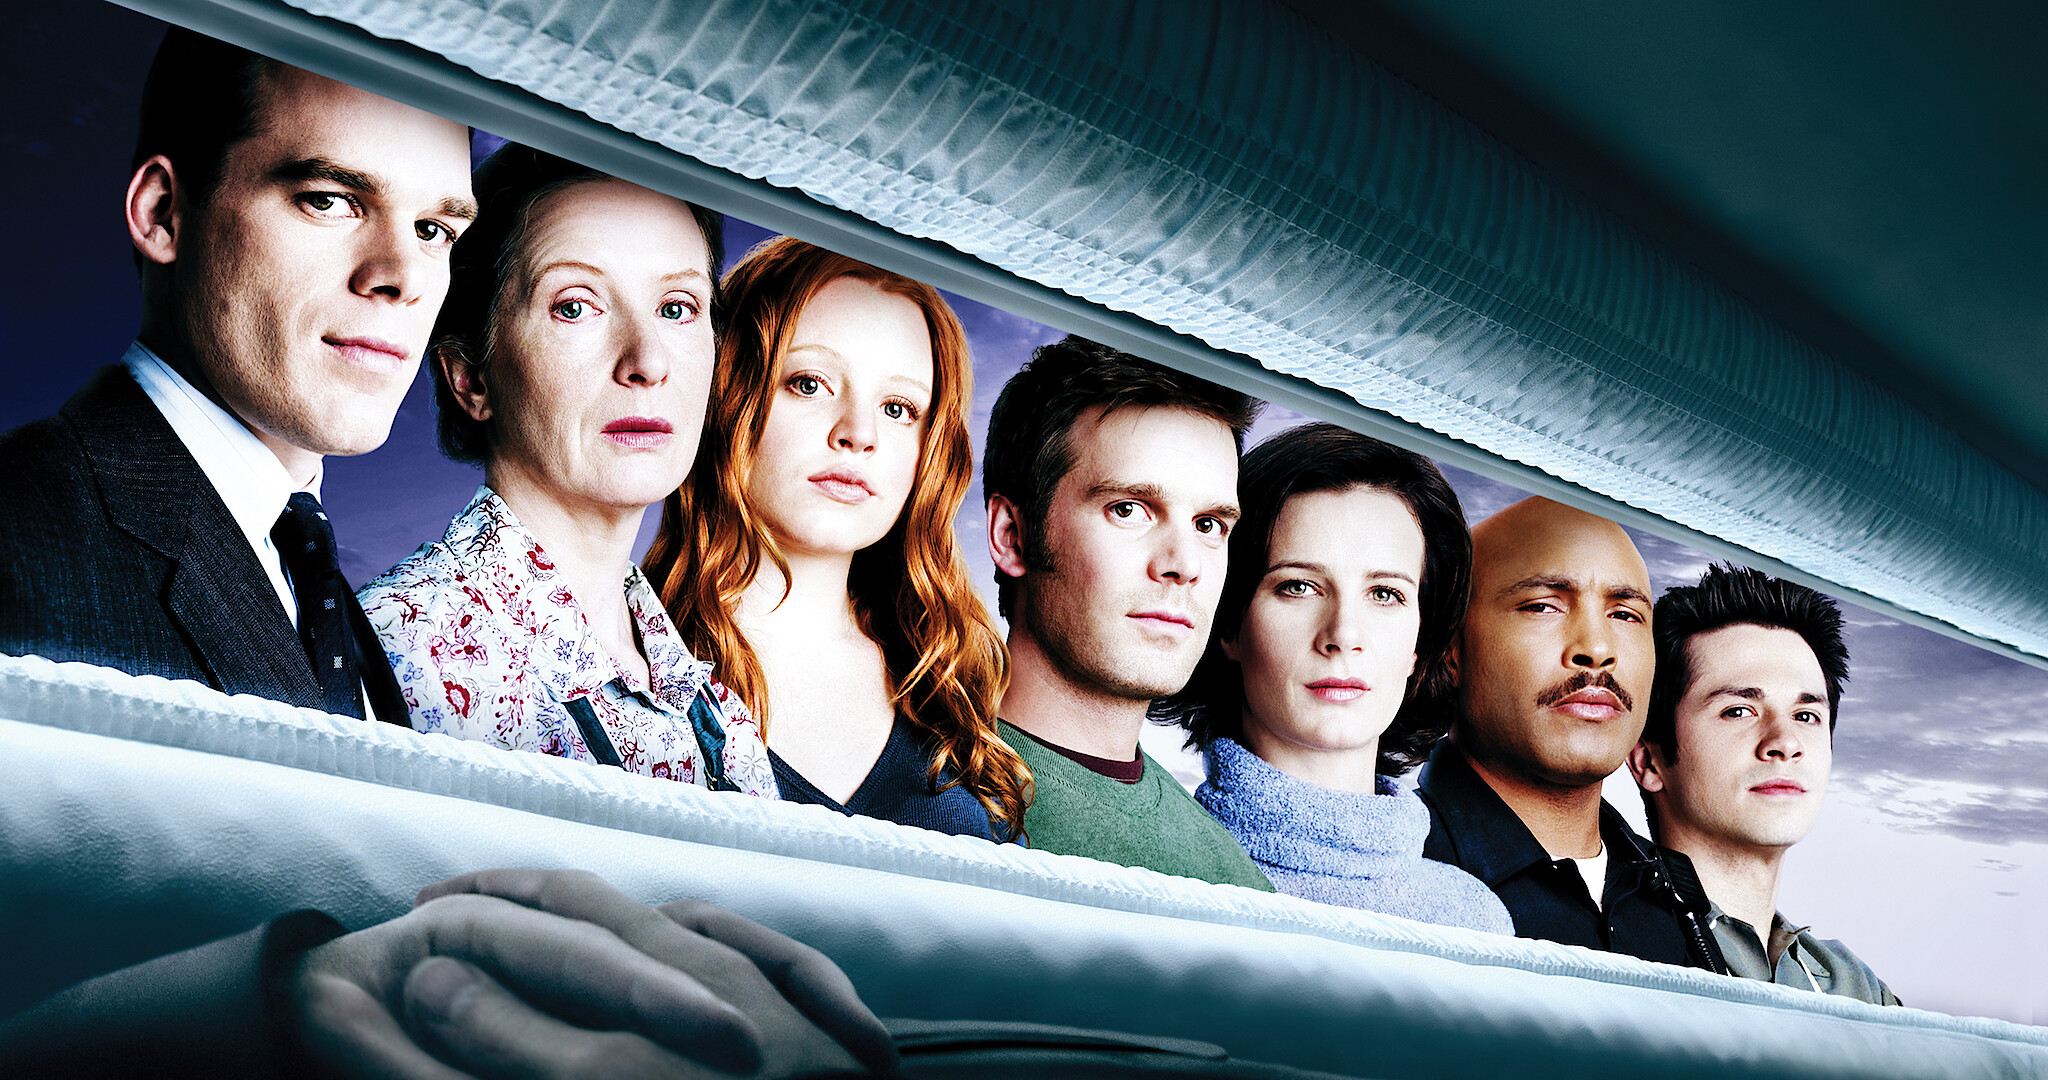 Six Feet Under is a TV series about death that speaks about life